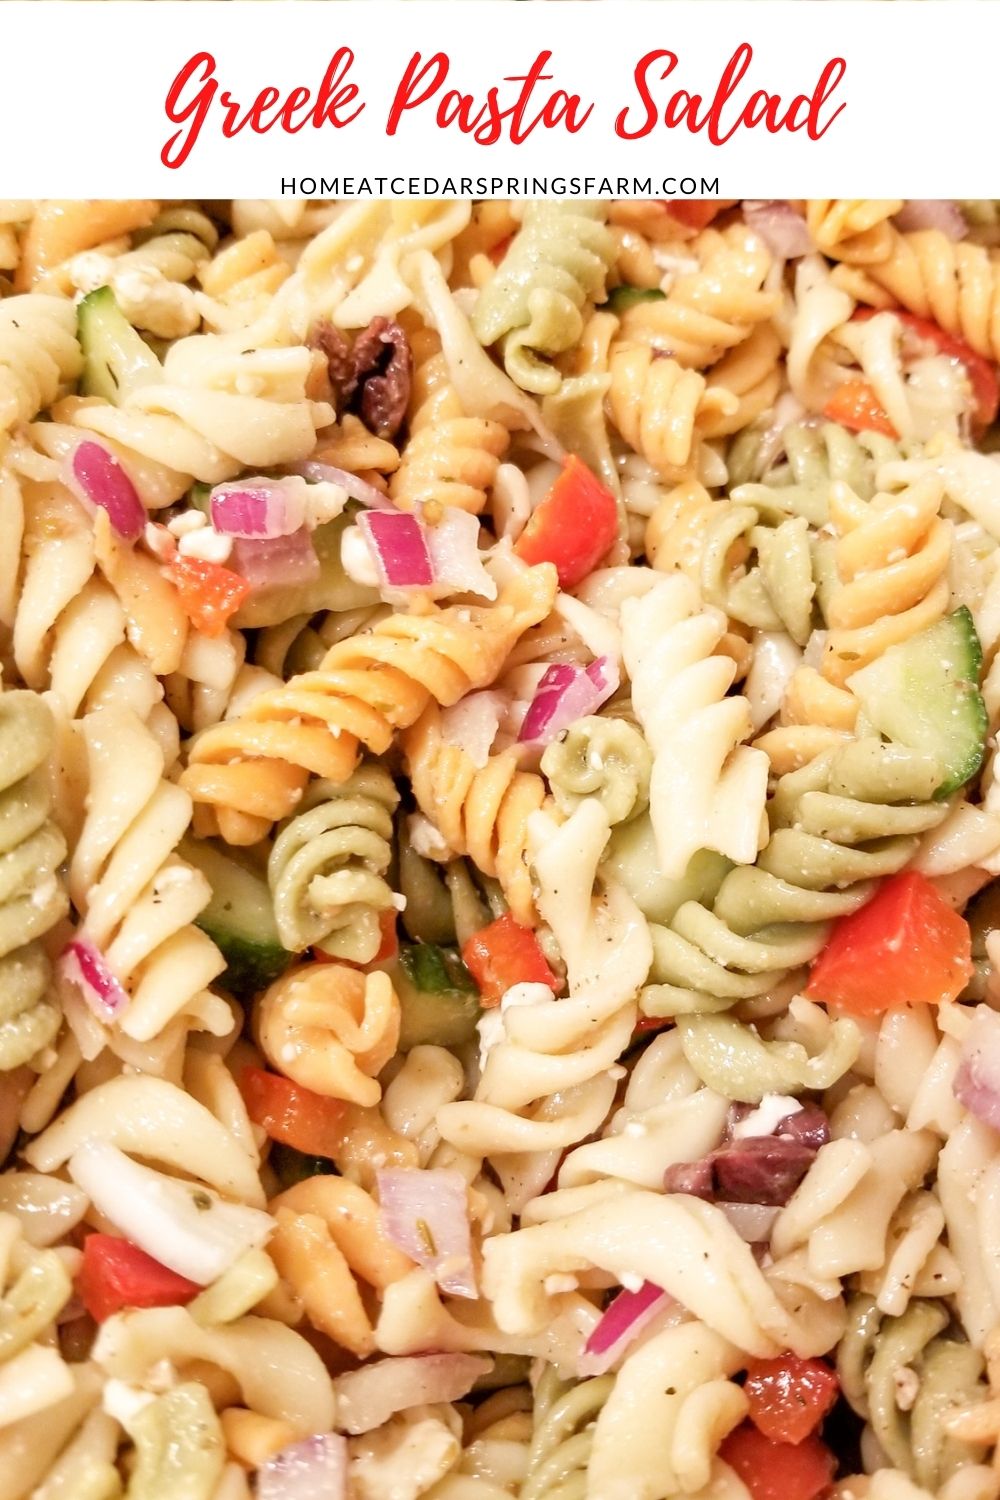 Picture of Greek Pasta Salad with text overlay